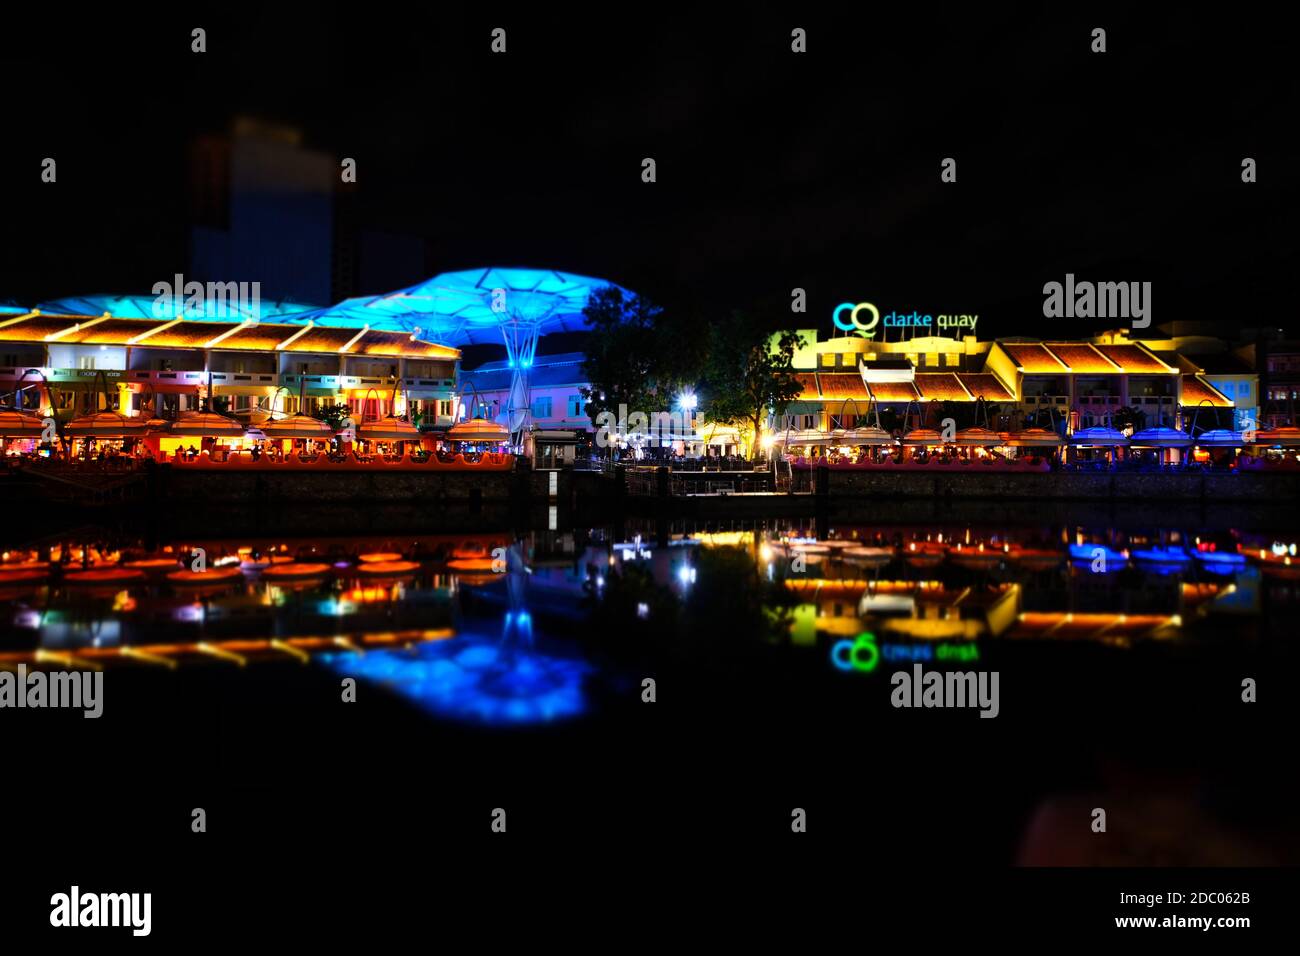 Clarke Quay is extremely colourful and full of life at night. It is one of Singapore's busy dining and entertainment hubs along the Singapore river. Stock Photo